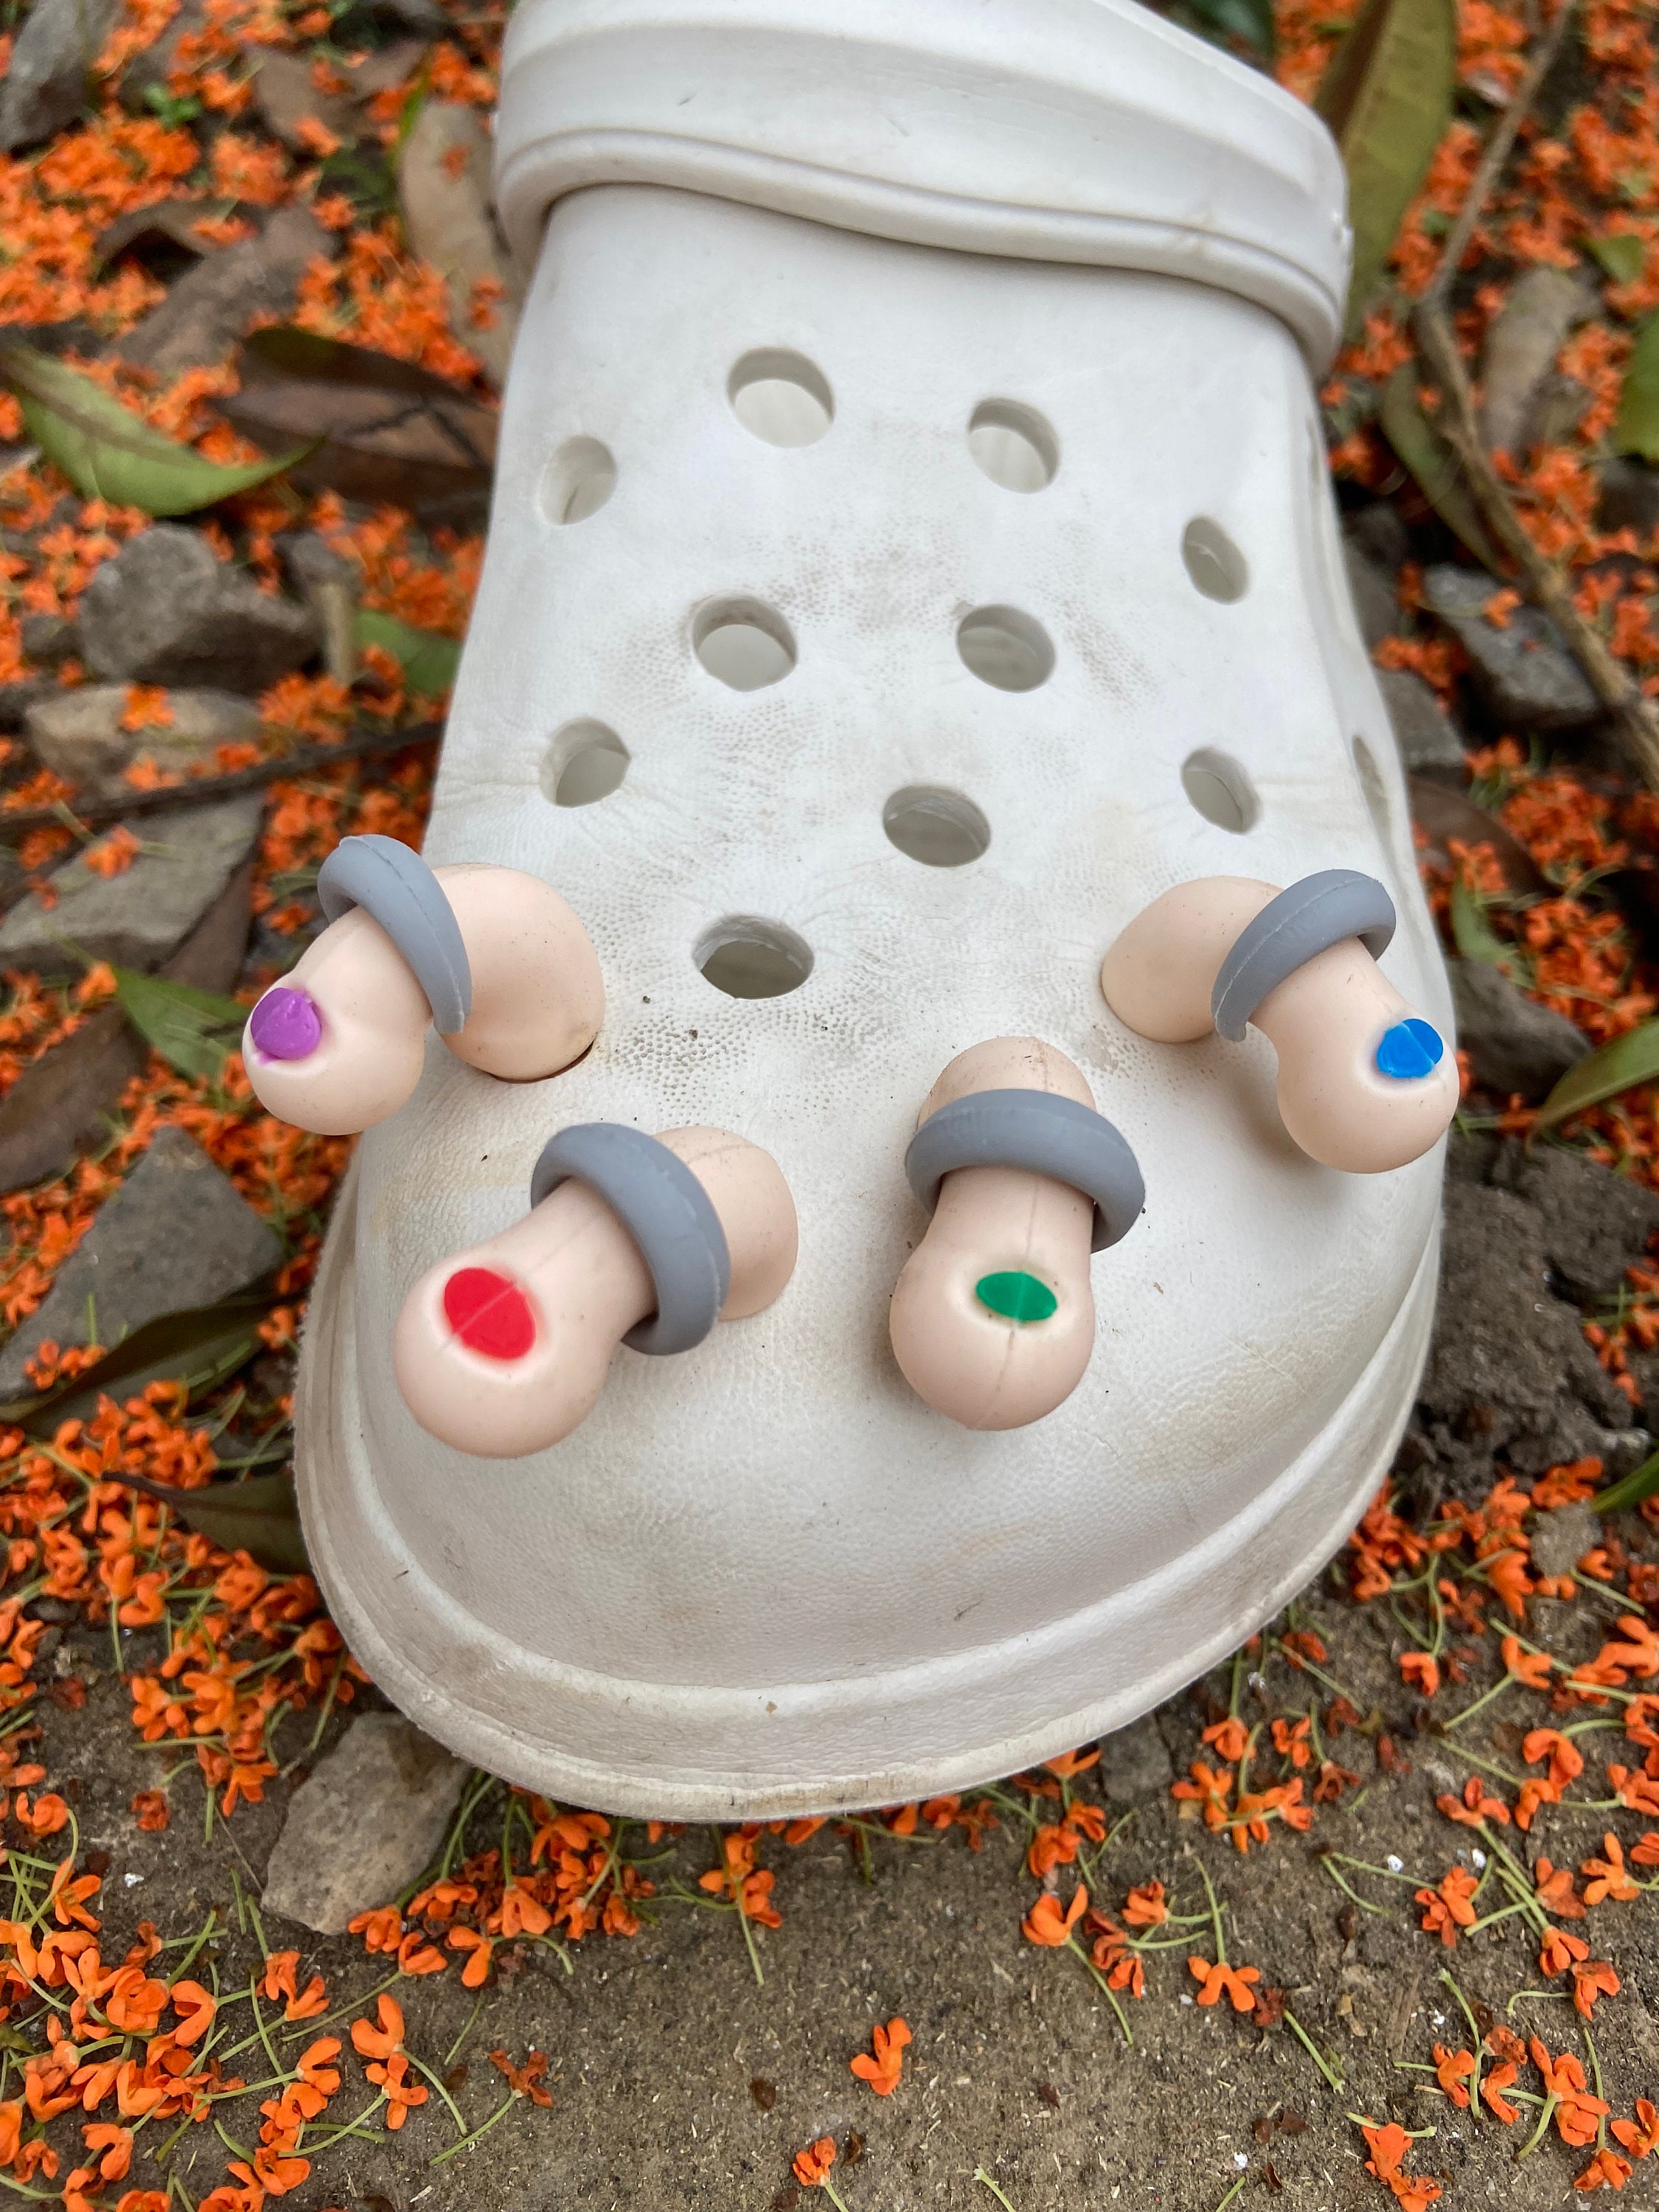 Funny Shoes Toes Charms Clog Decoration, Prank Crocs Accessories  Abnormal-shaped Toe Shoe Decoration Charms For Gag Gifts